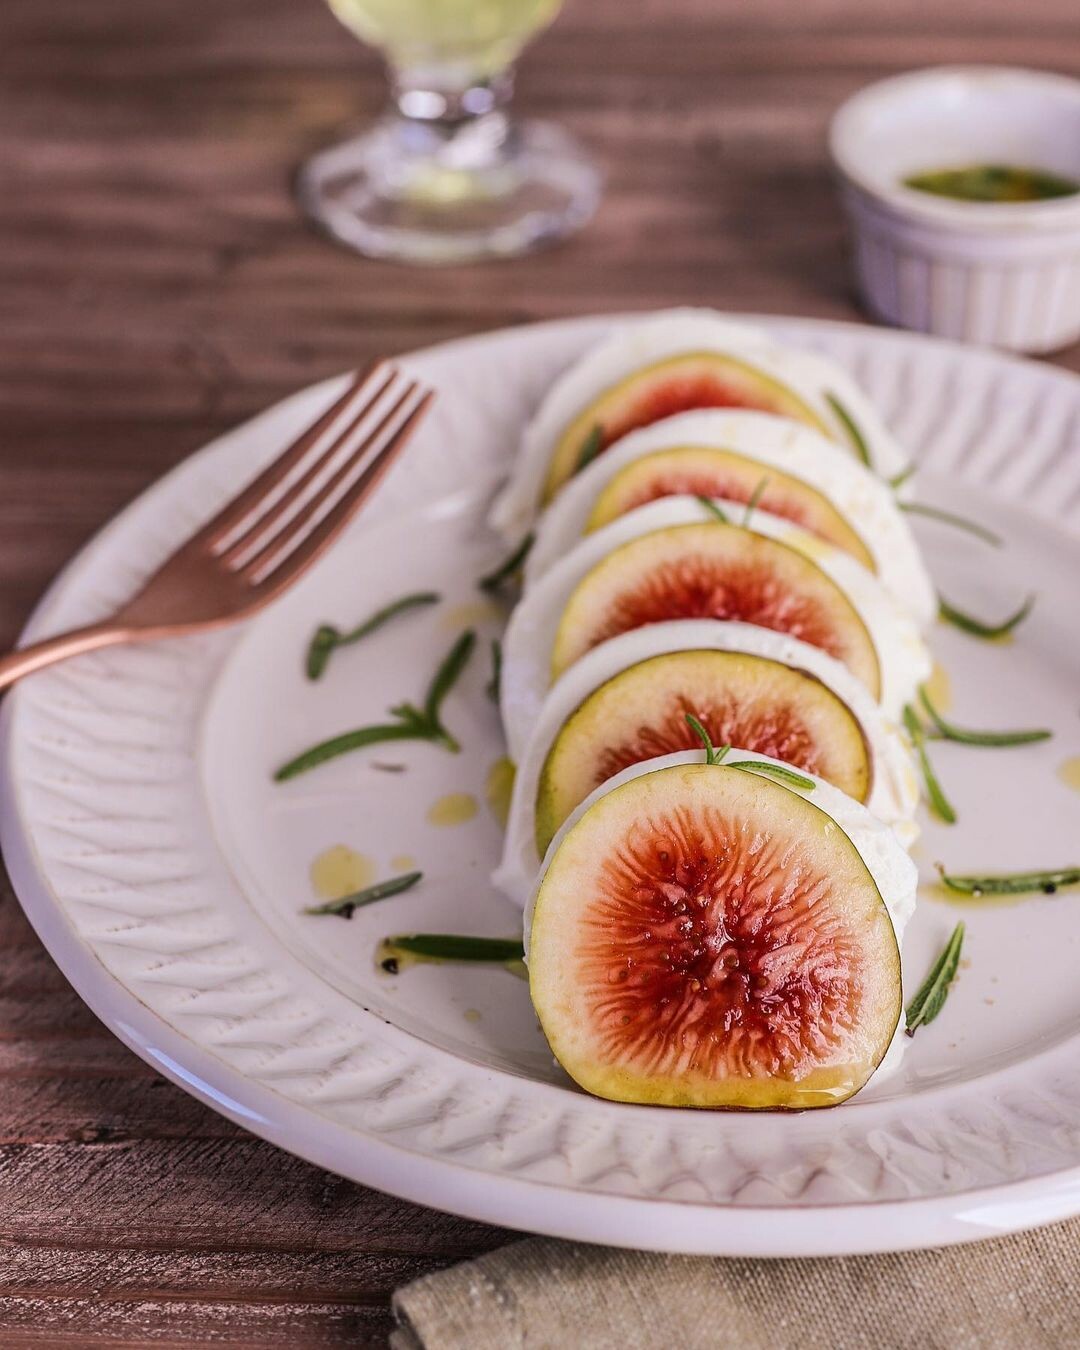 How To Eat Figs: A Guide From An Etiquette Expert